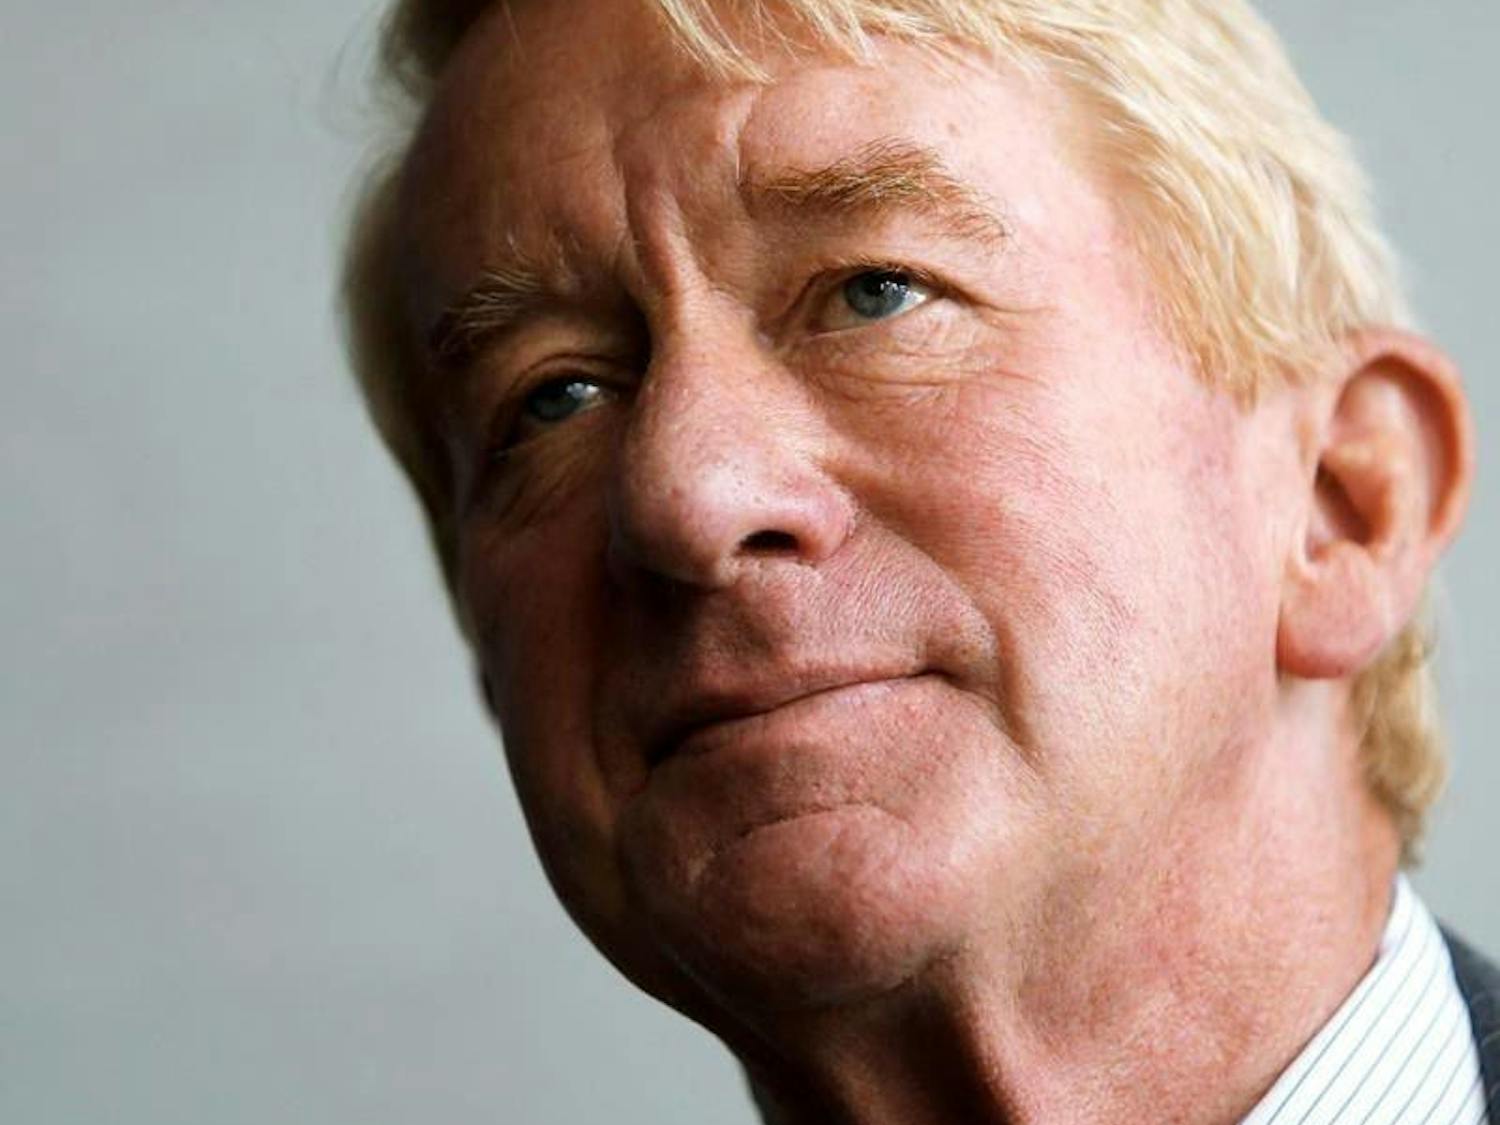 Bill Weld, the Republican challenger of Donald Trump, secured one delegate out of the 40 from the Iowa Caucus. Weld is the former governor of Massachusetts.